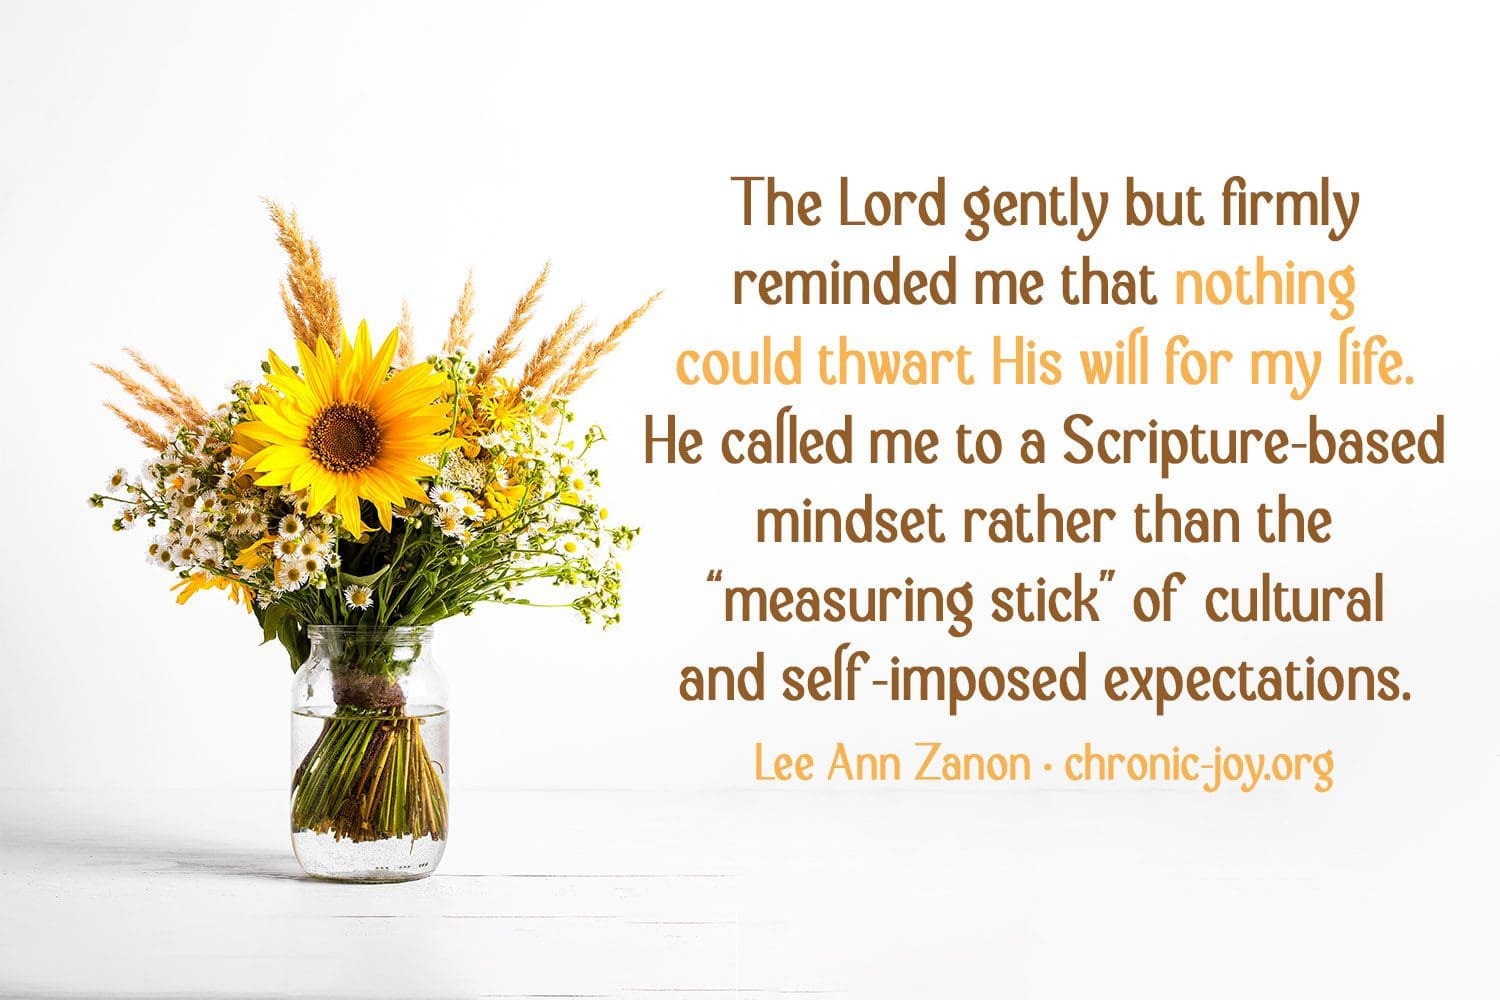 "The Lord gently but firmly reminded me that nothing could thwart His will for my life. He called me to a Scripture-based mindset rather than the 'measuring stick' of cultural and self-imposed expectations." Lee Ann Zanon